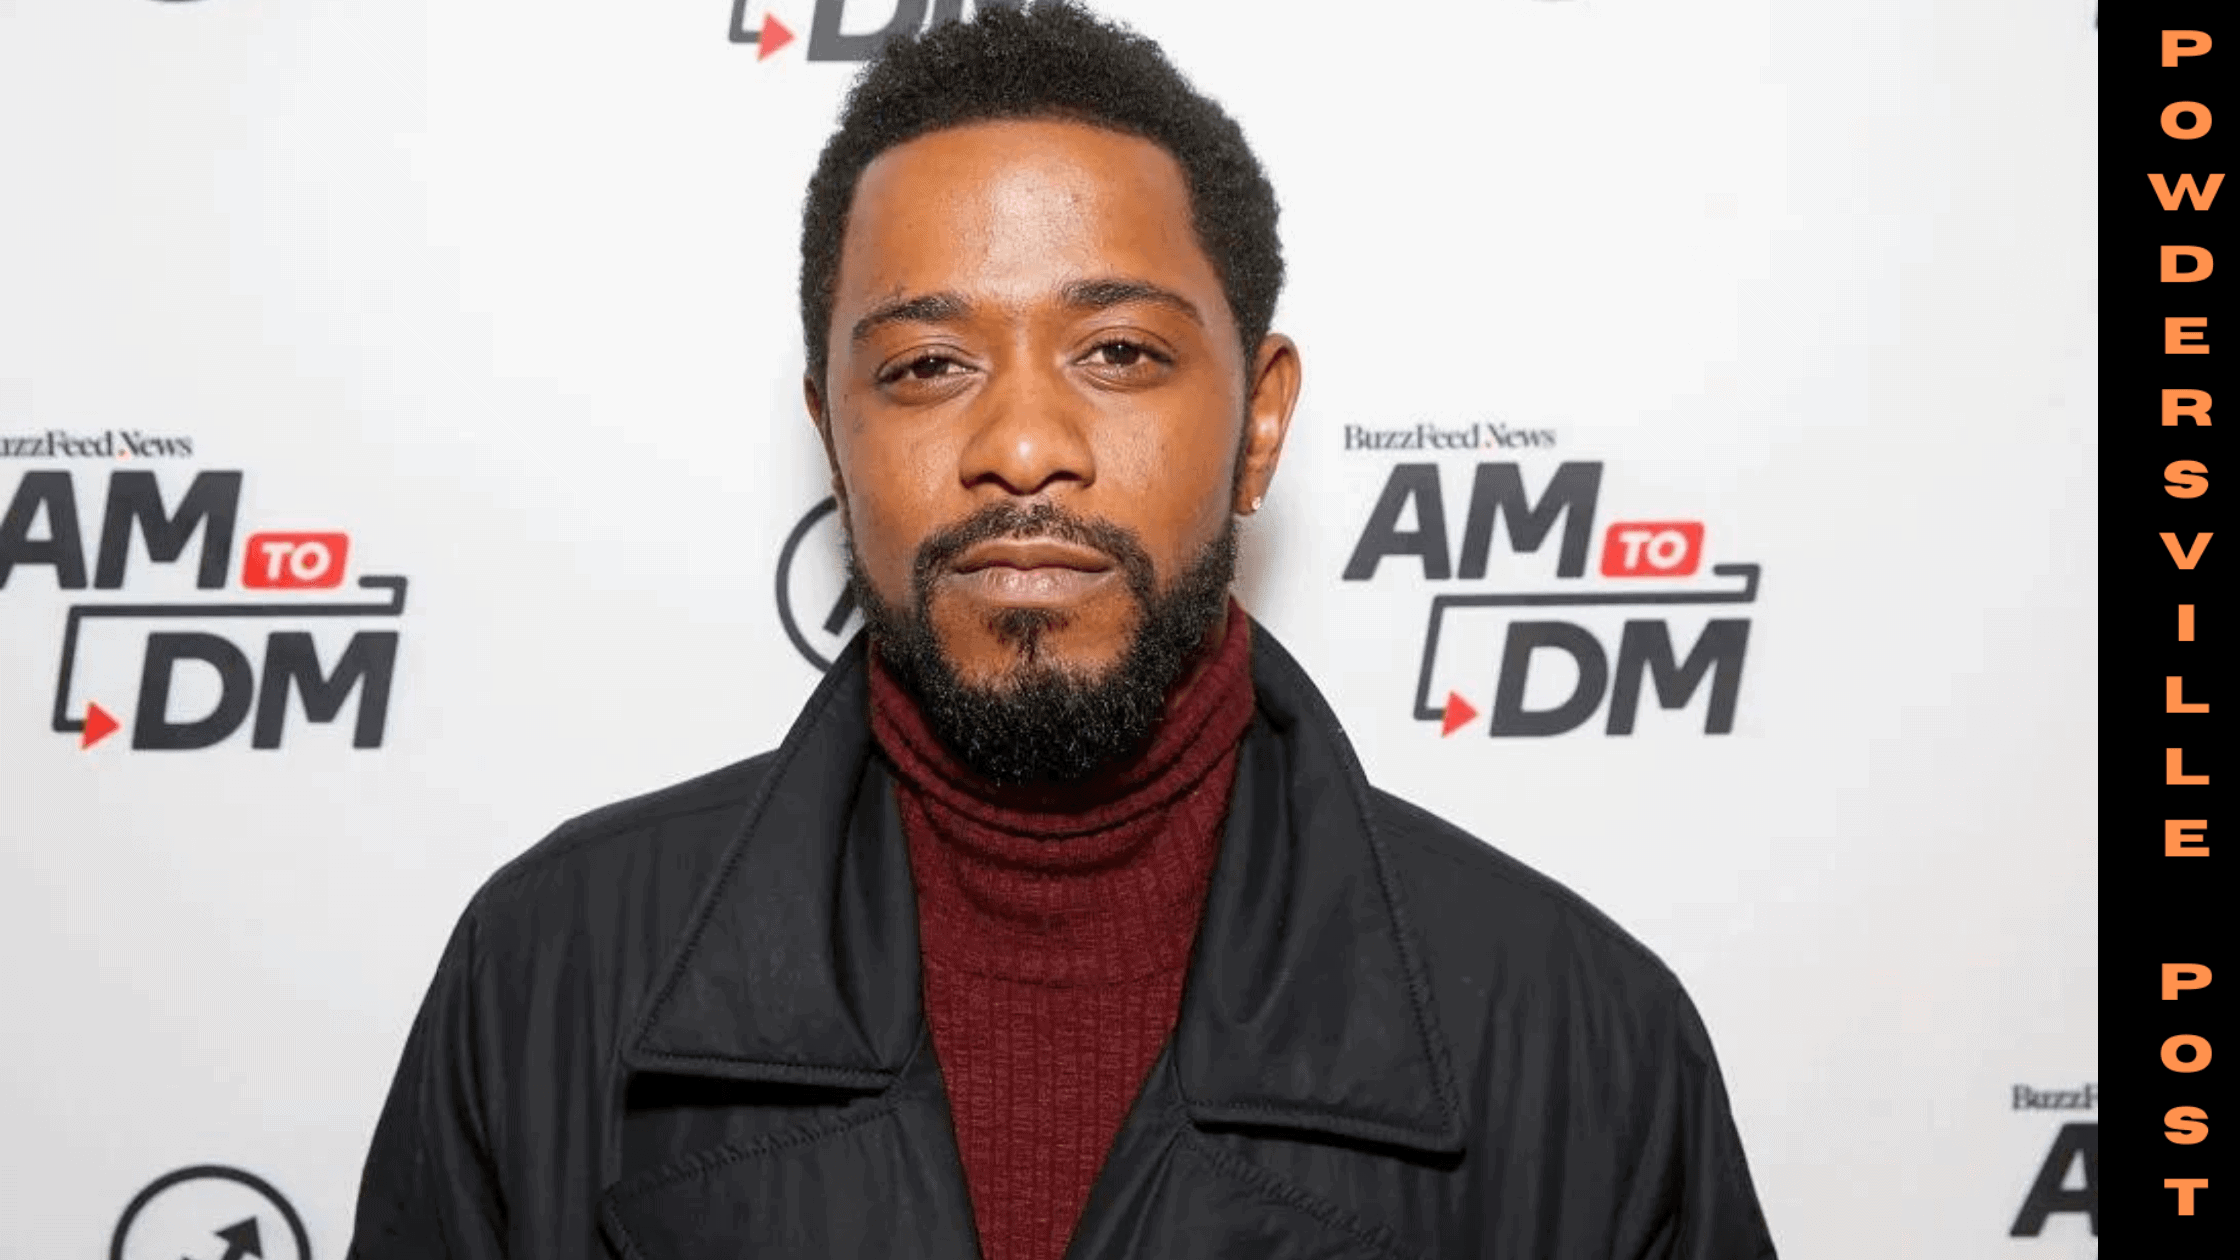 Famous Actor Lakeith Stanfield Shares Up About His Struggles With Alcoholism